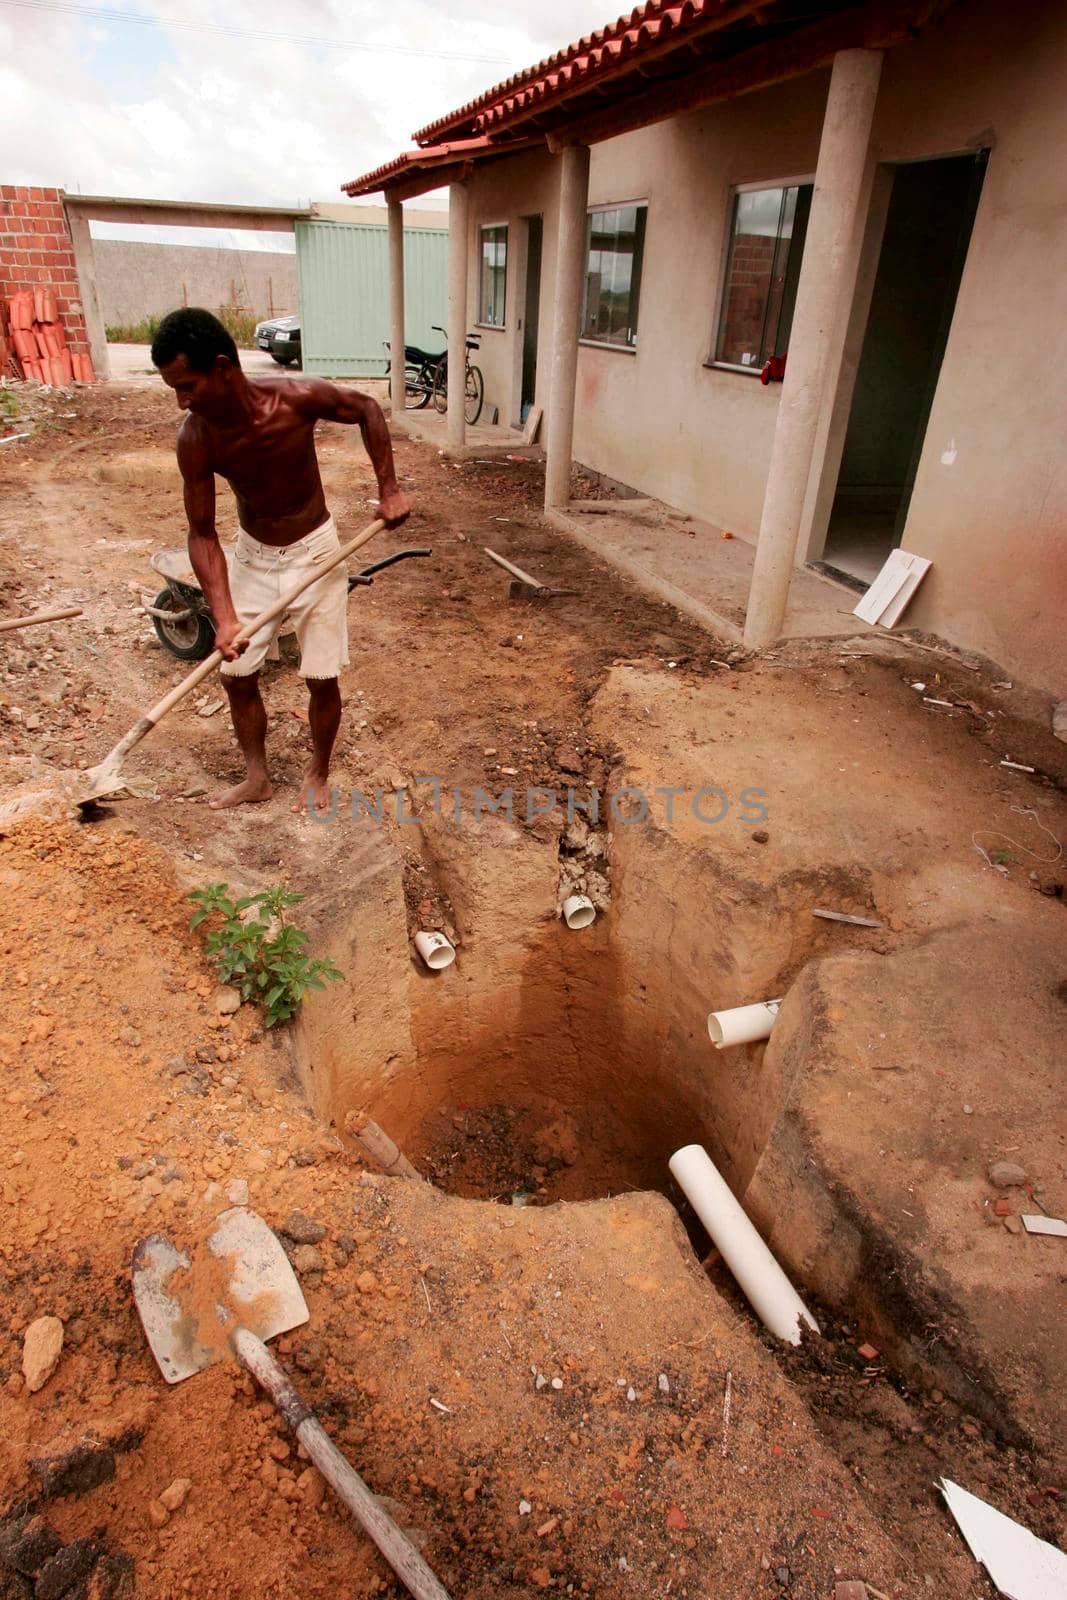 Eunapolis, Bahia / Brazil - February 3, 2010: Septic tank is seen during construction residence in the city of Eunapolis.